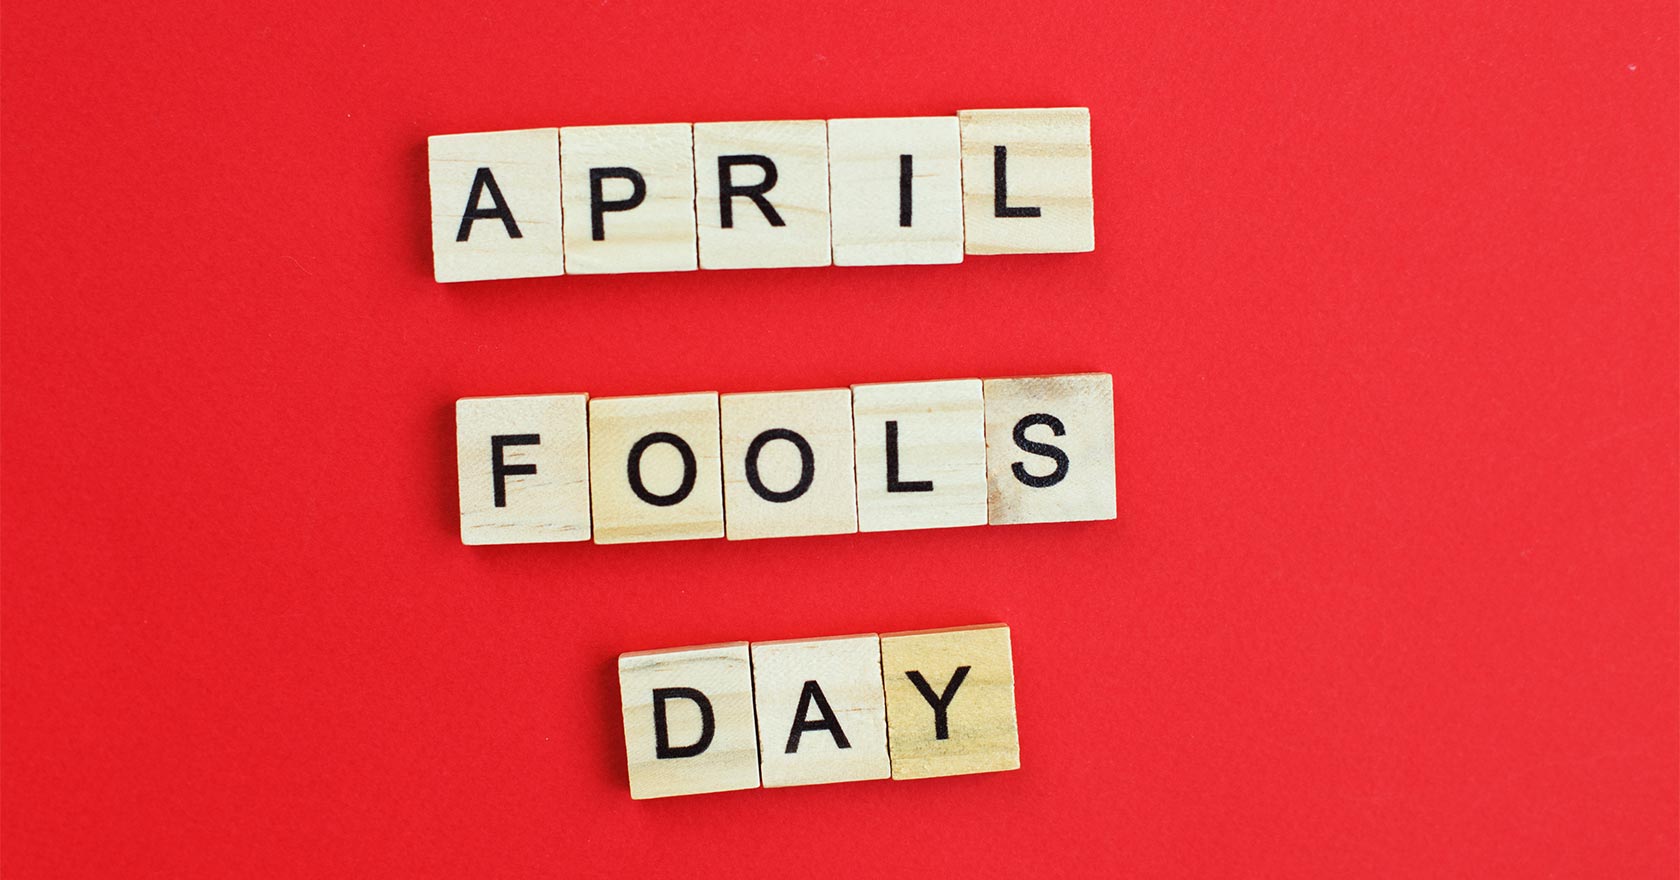 Don't Be the Fool on April Fools' Day: Tips For a Fun April 1st